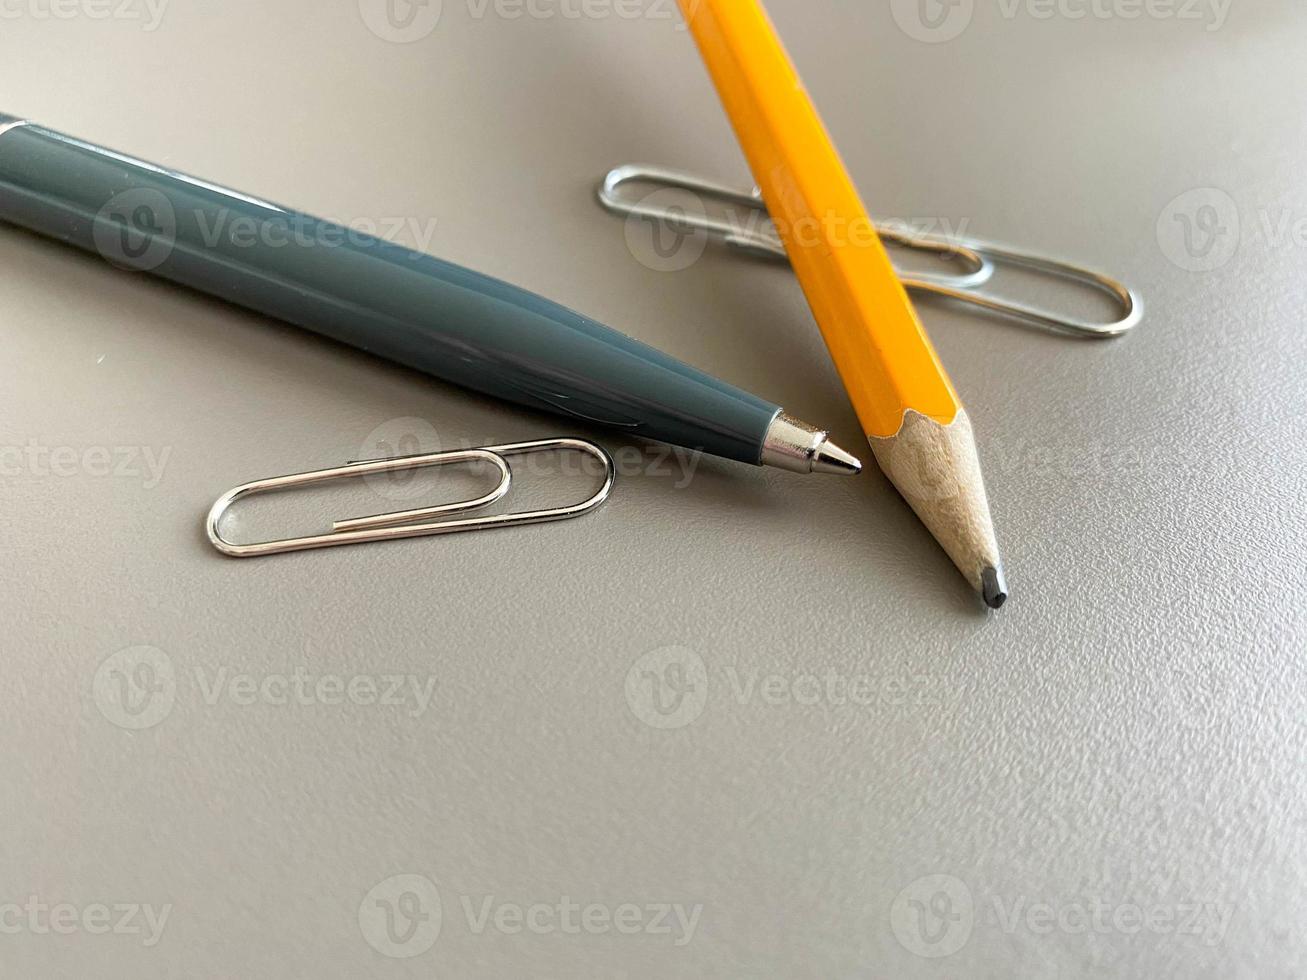 Automatic green ballpoint pen and pencil with paper clips for writing on your desktop office desk. Business work photo